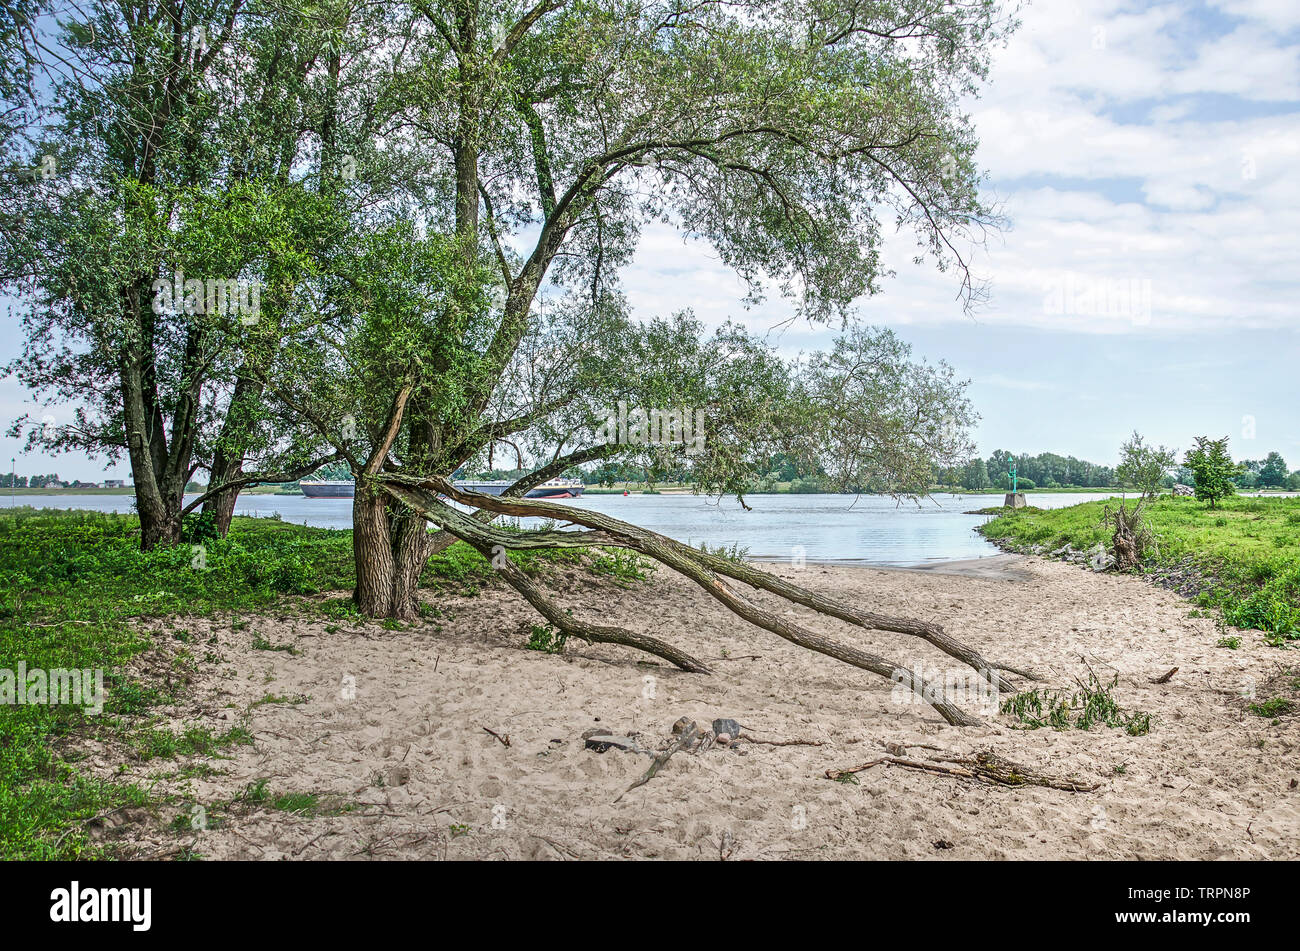 Two trees, one with fallen branches, on a sandy beach in a wild area of the floodplains of the river Waal near Woudrichem, The Netherlands Stock Photo